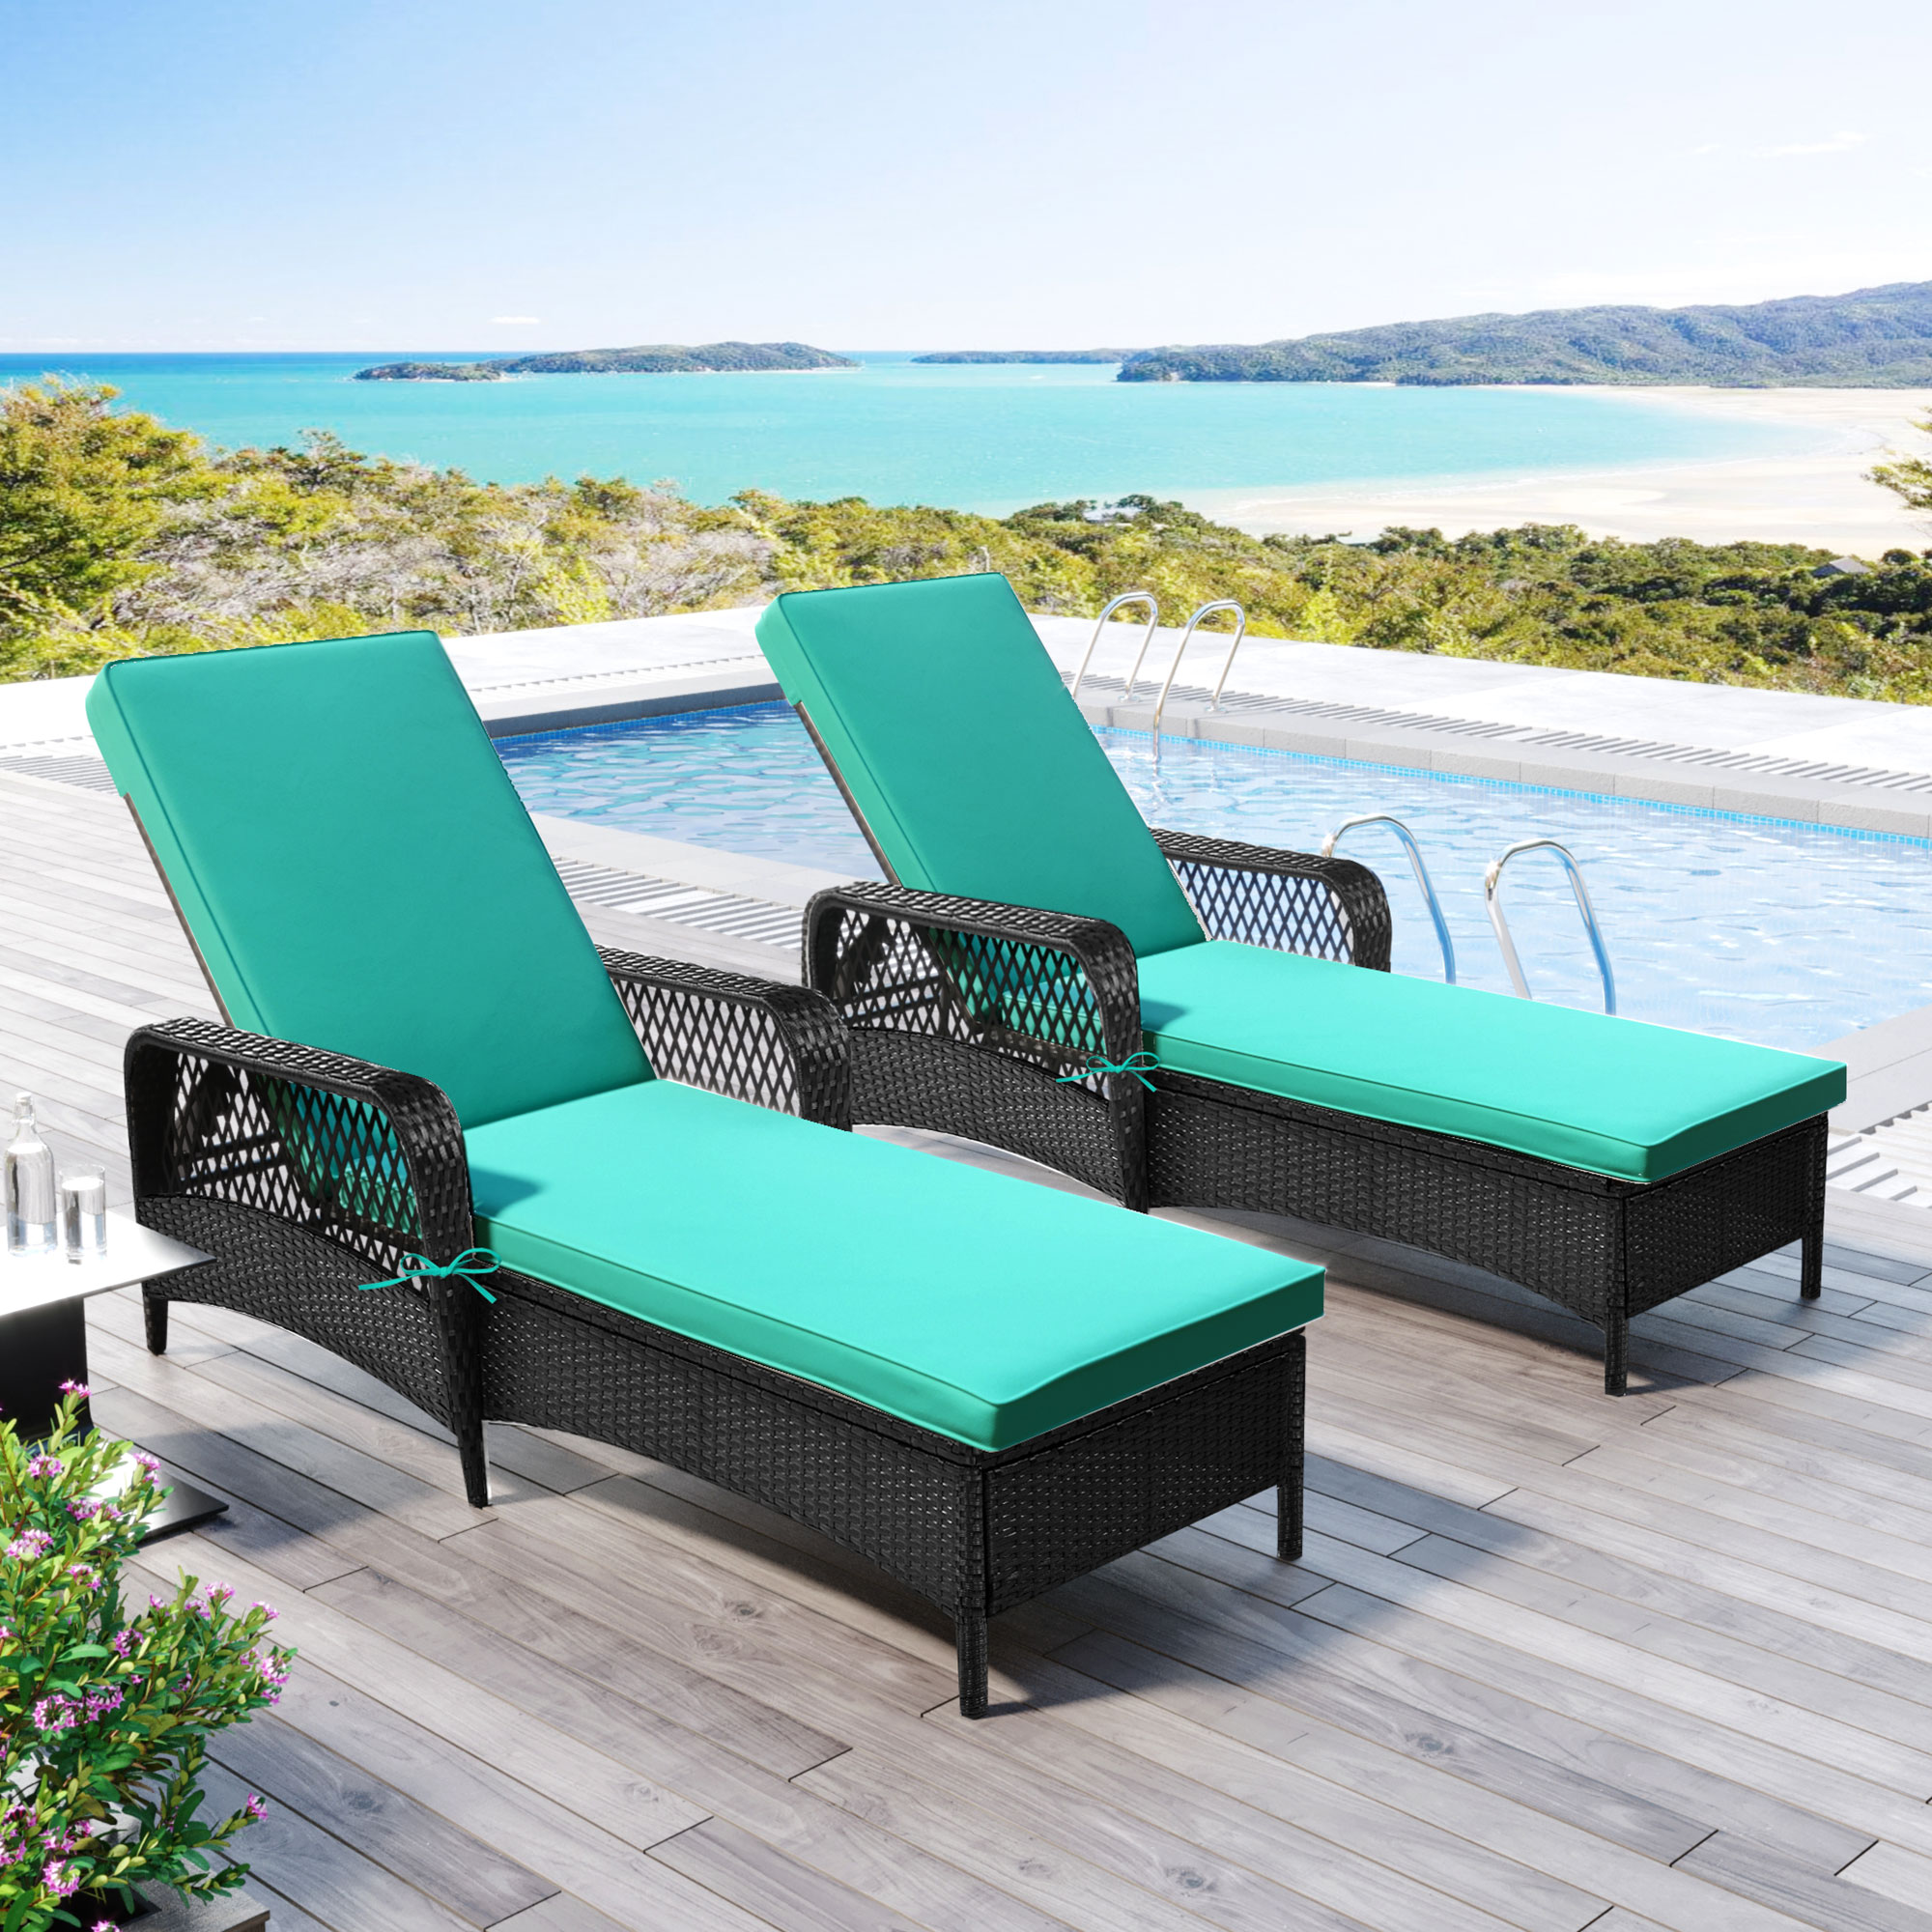 Sesslife Chaise Lounge Chair for Outside, Rattan Wicker Outdoor Lounge Chair, Adjustable Pool Lounge Chair with Thickened Cushion for Patio Poolside Deck(2 Sets) - image 1 of 10